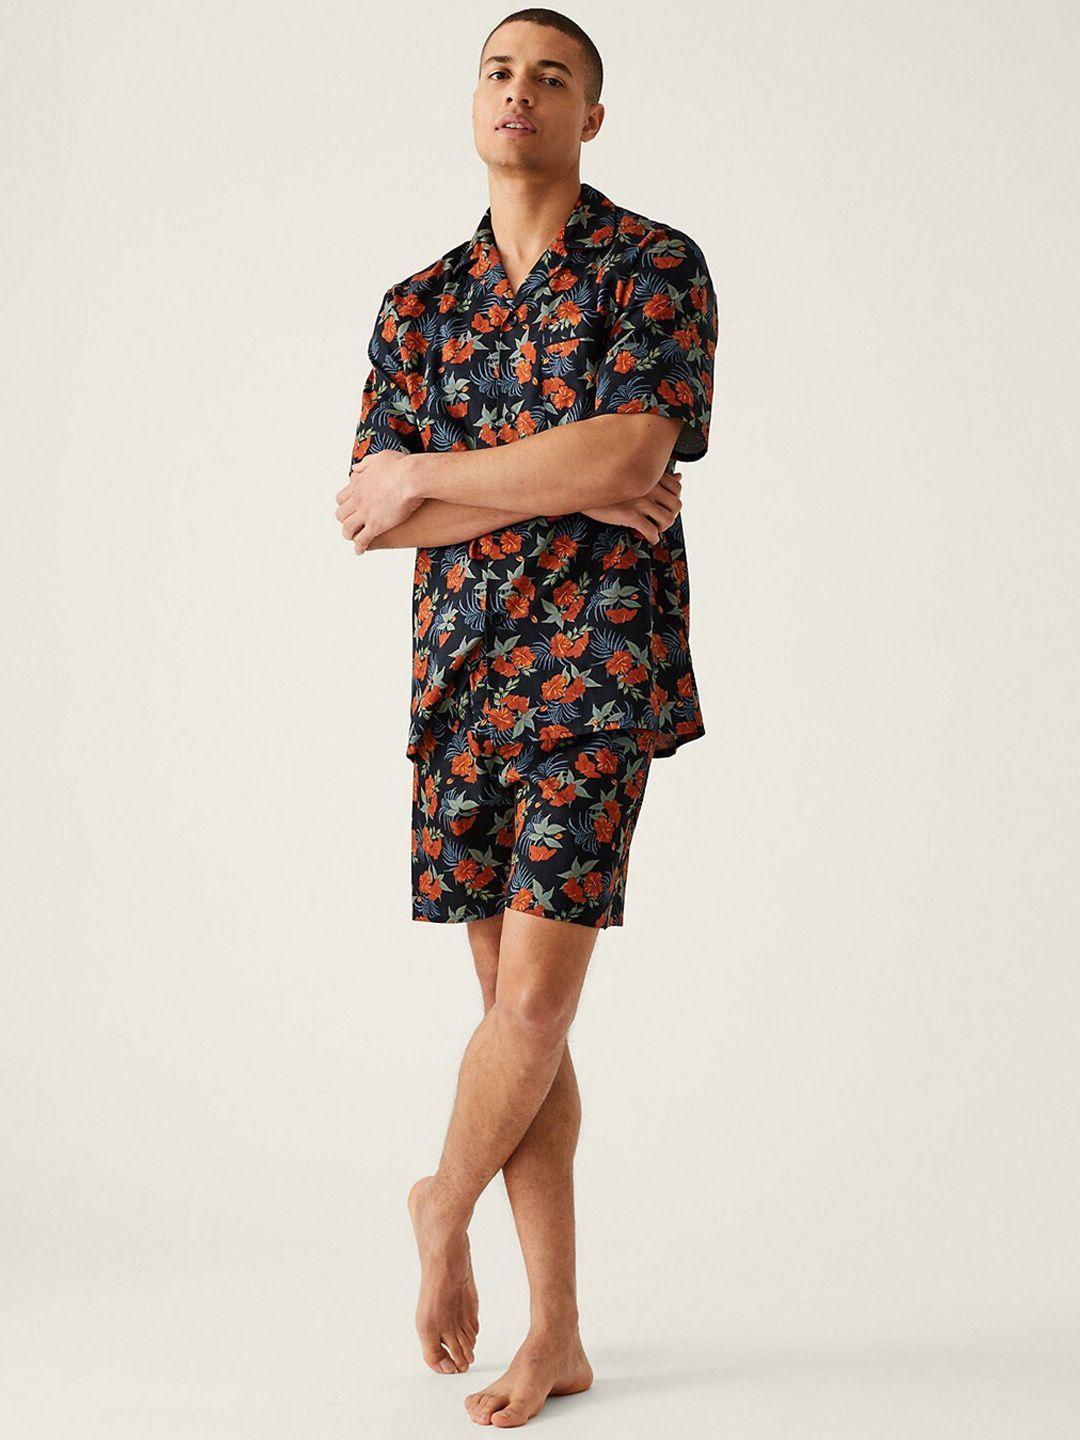 marks & spencer floral printed pure cotton night suit